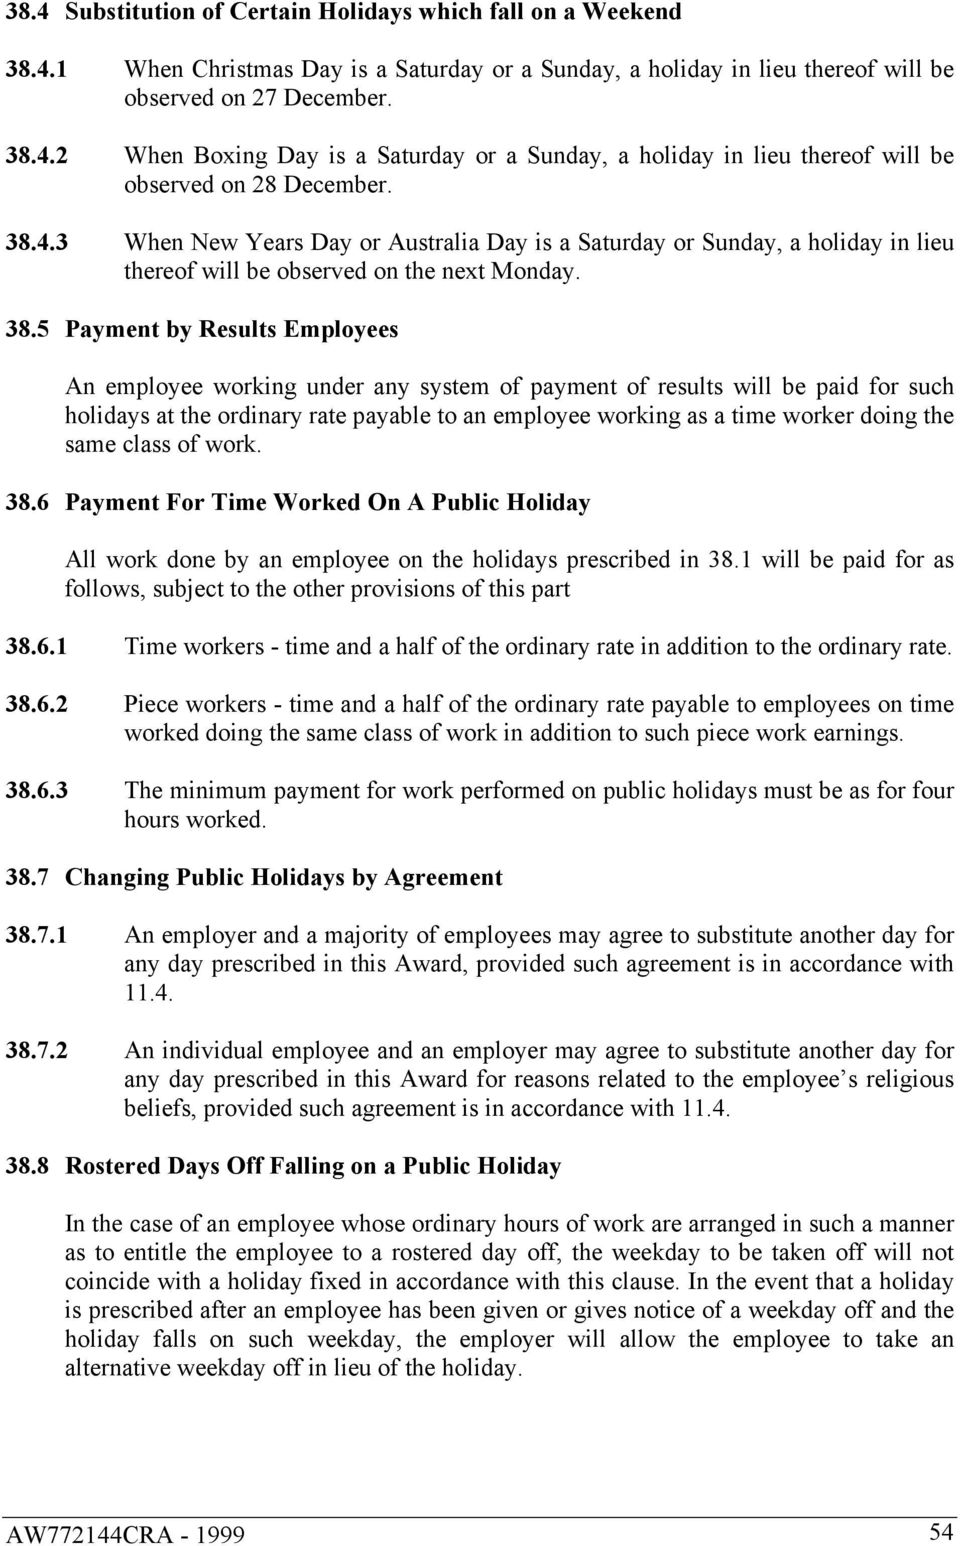 5 Payment by Results Employees An employee working under any system of payment of results will be paid for such holidays at the ordinary rate payable to an employee working as a time worker doing the